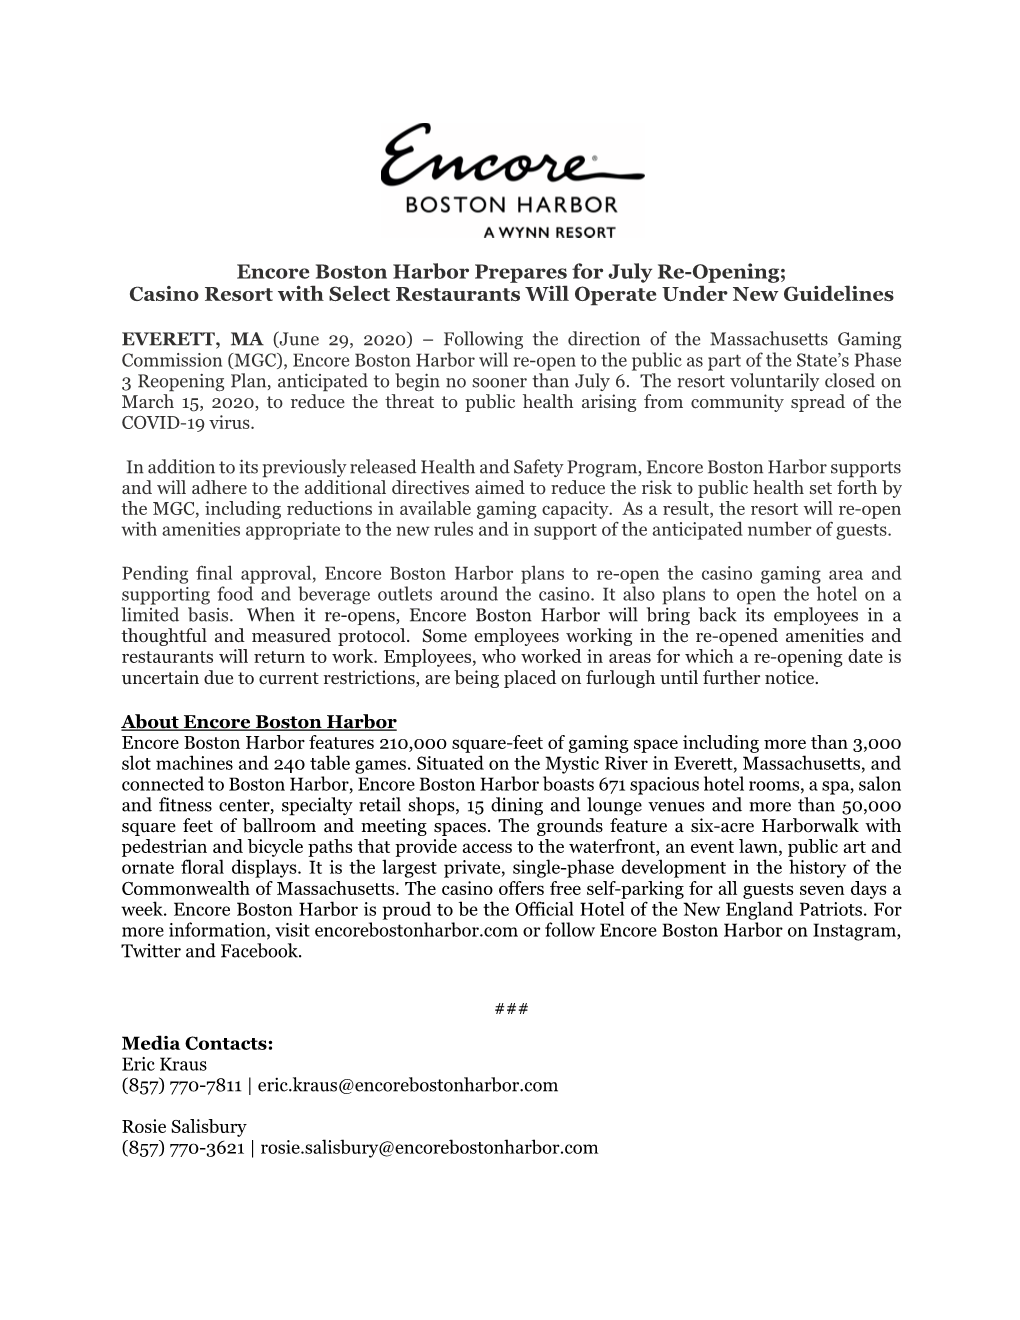 Encore Boston Harbor Prepares for July Re-Opening; Casino Resort with Select Restaurants Will Operate Under New Guidelines